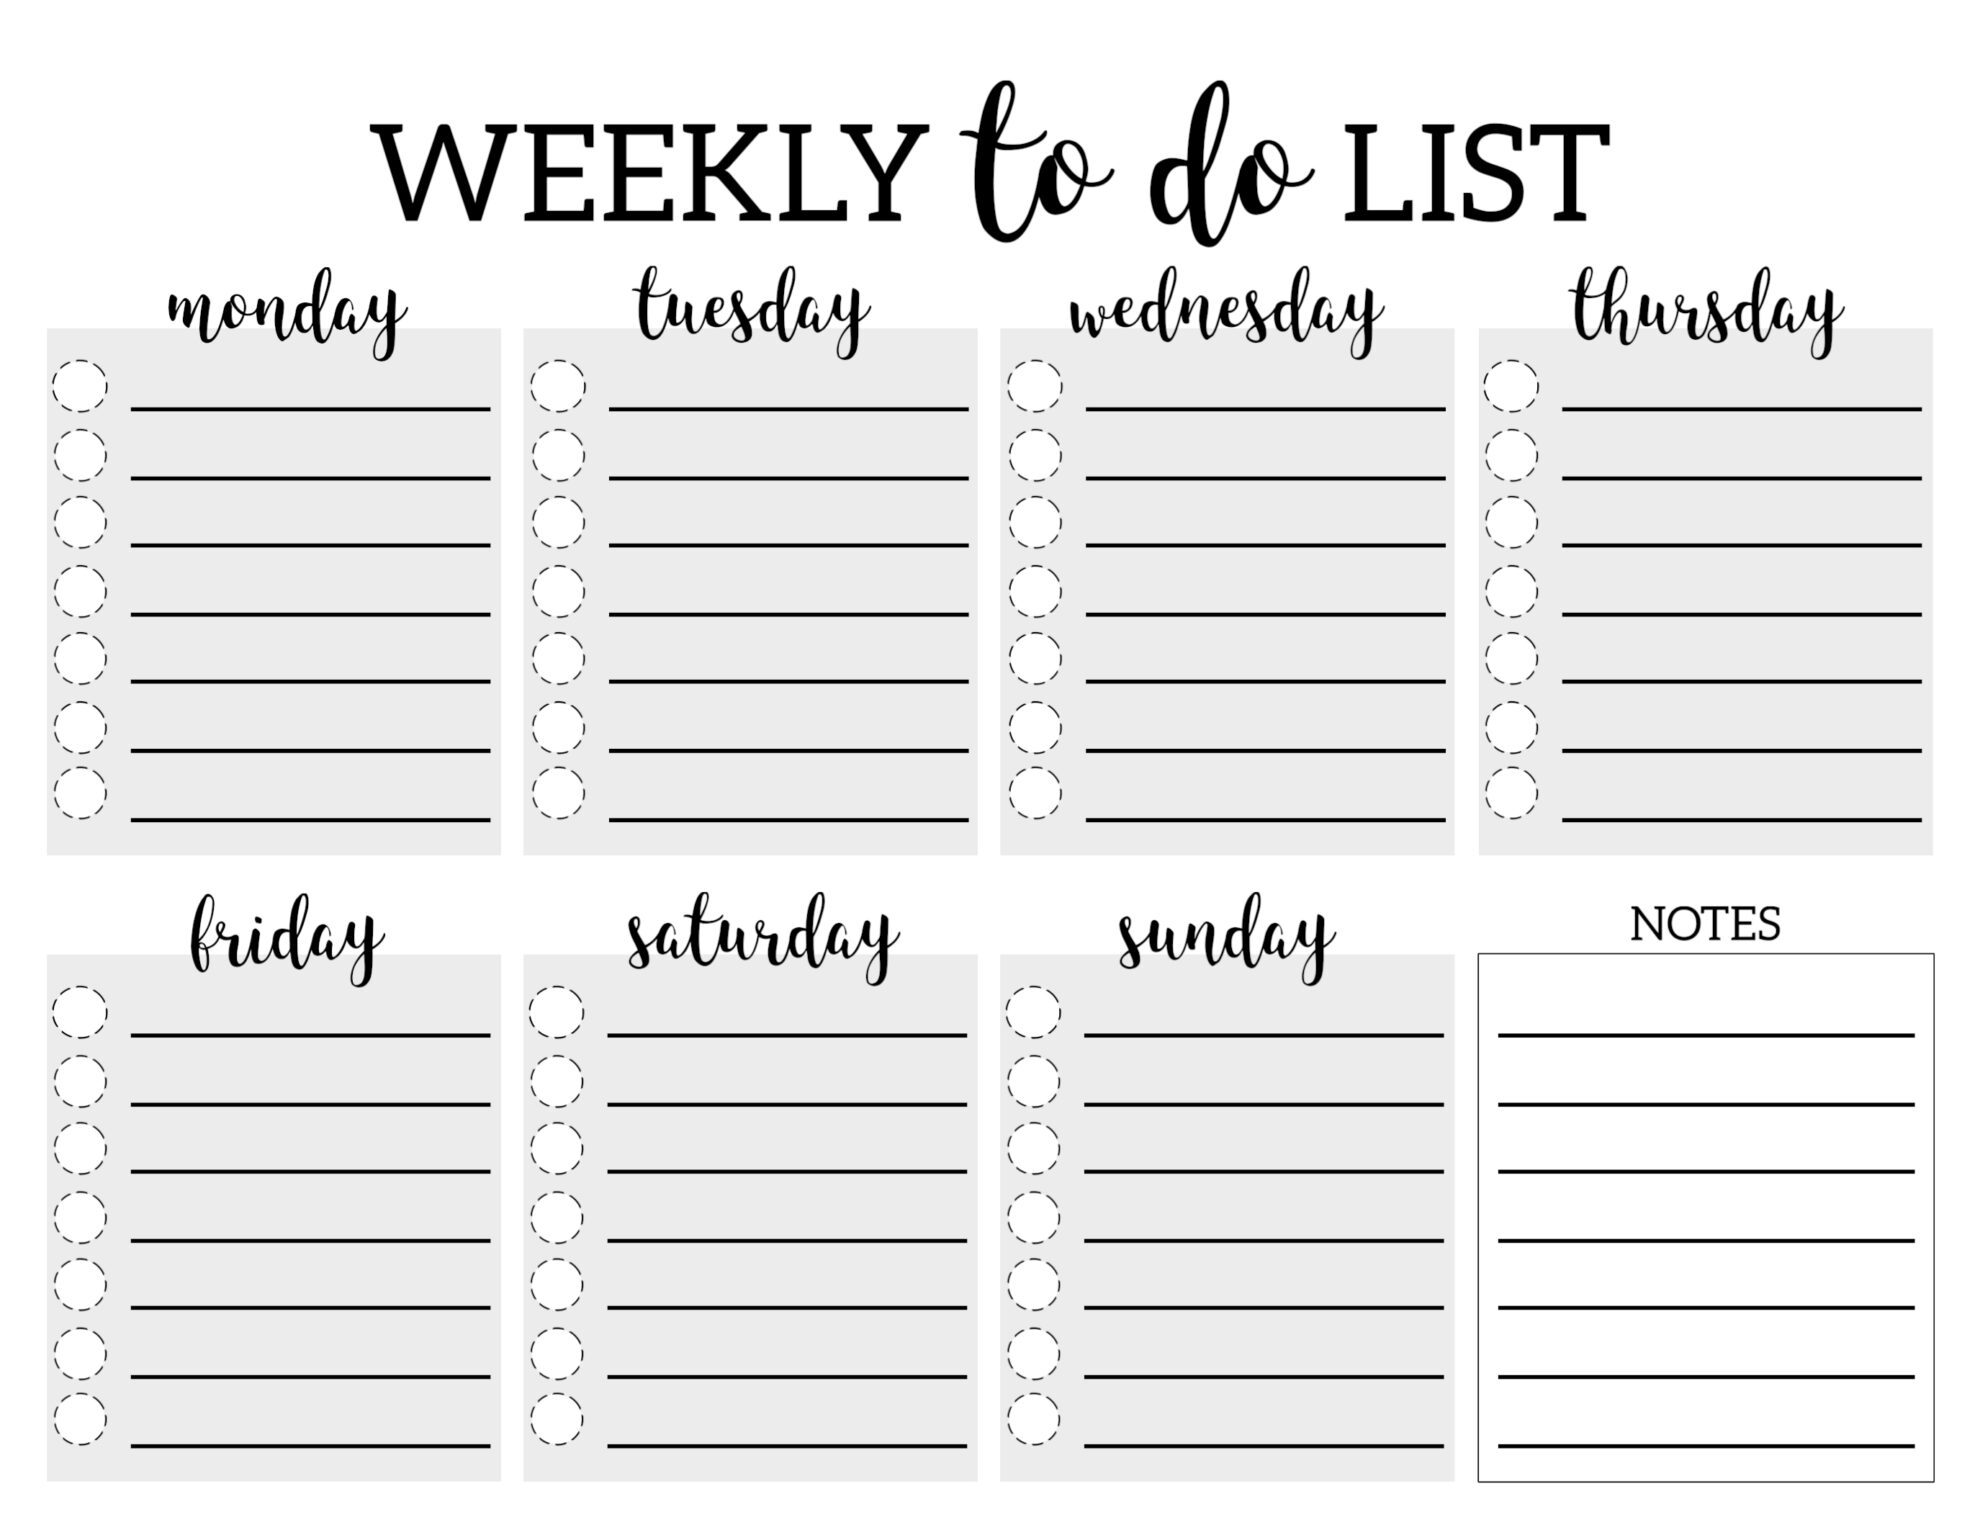 Weekly To Do List Printable Checklist Template  Paper Trail Design Regarding Checklist With Boxes Template Pertaining To Checklist With Boxes Template